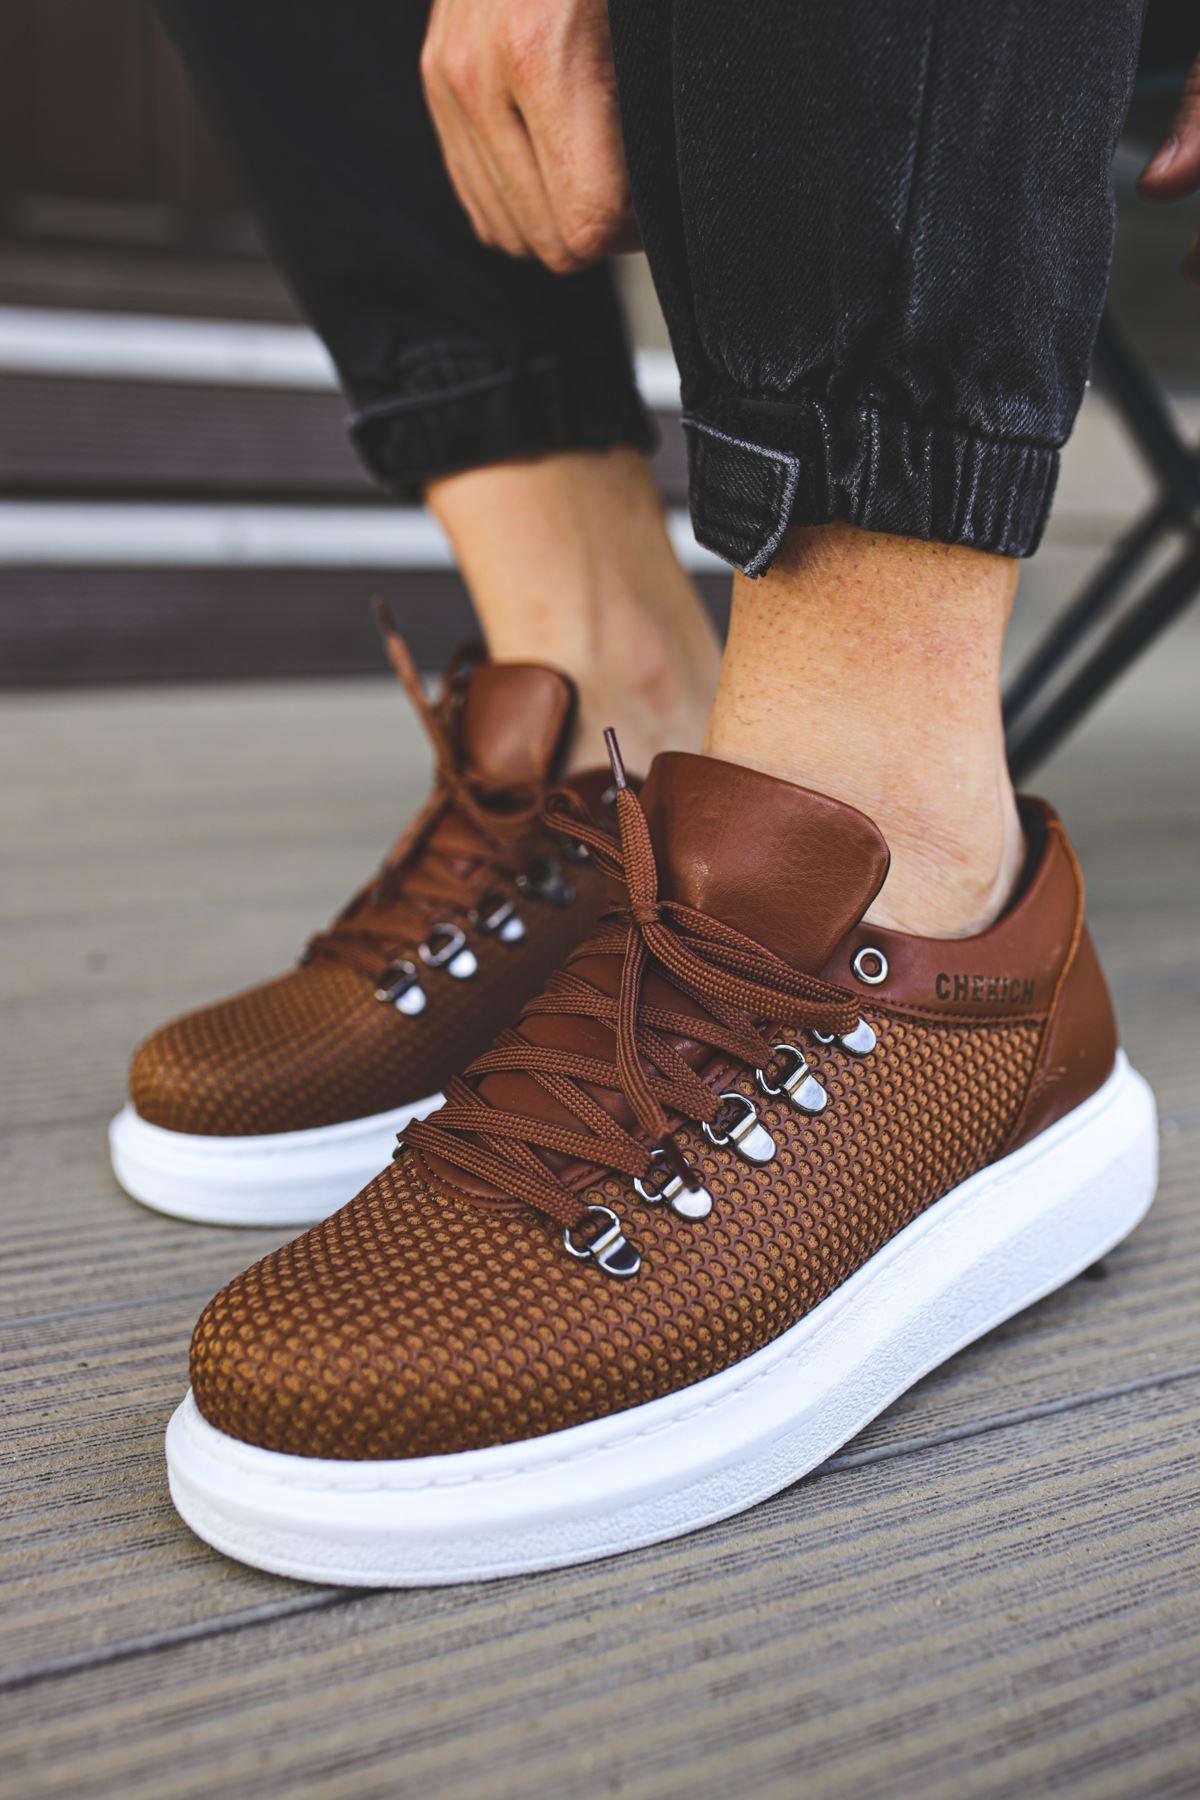 CH021 Men's Unisex Brown-White Sole Honeycomb Processing Casual Sneaker Sports Shoes - STREET MODE ™